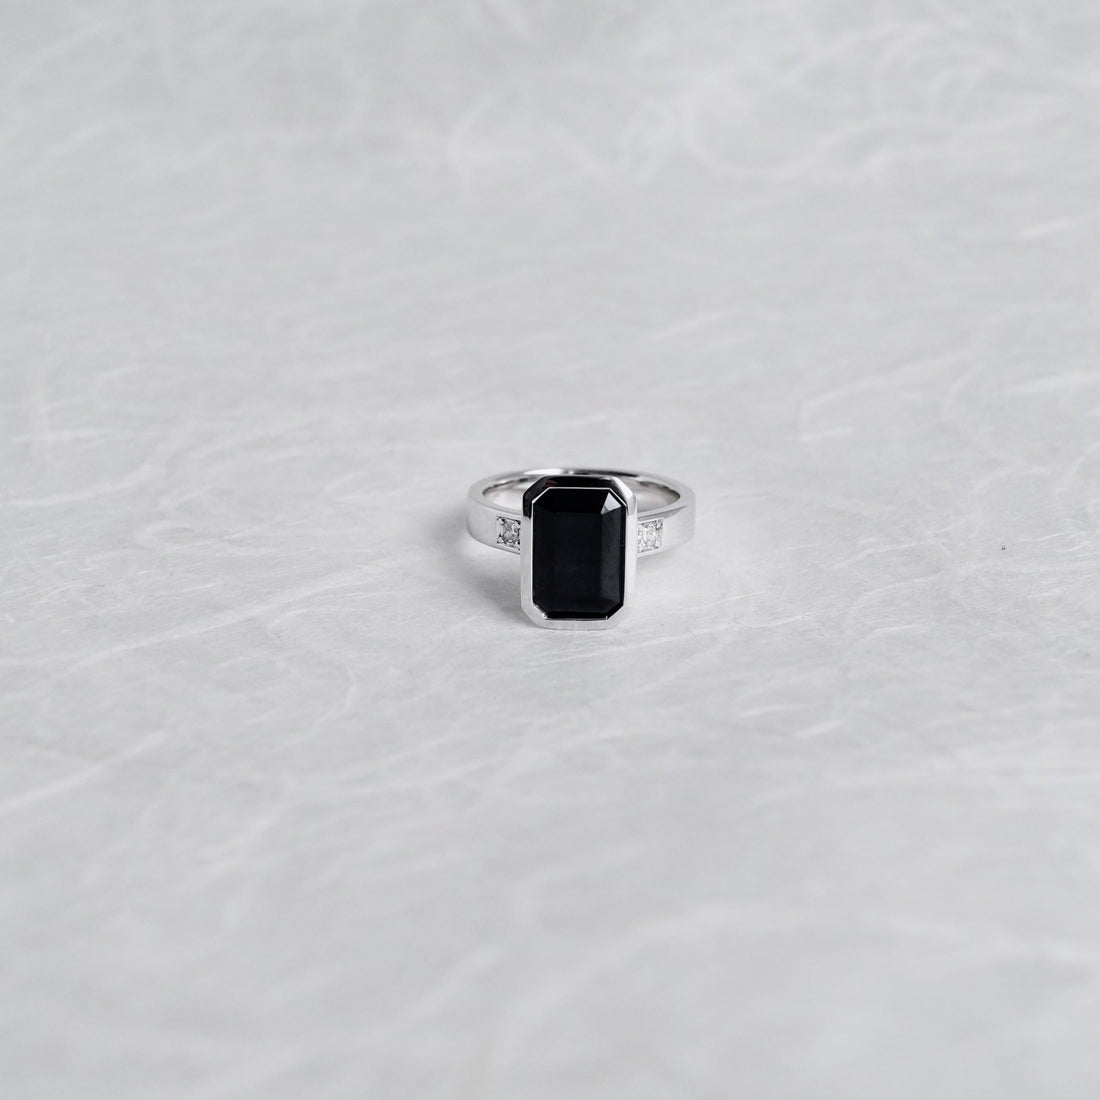 White Gold Tasmanian Spinel Ring (Limited Edition)